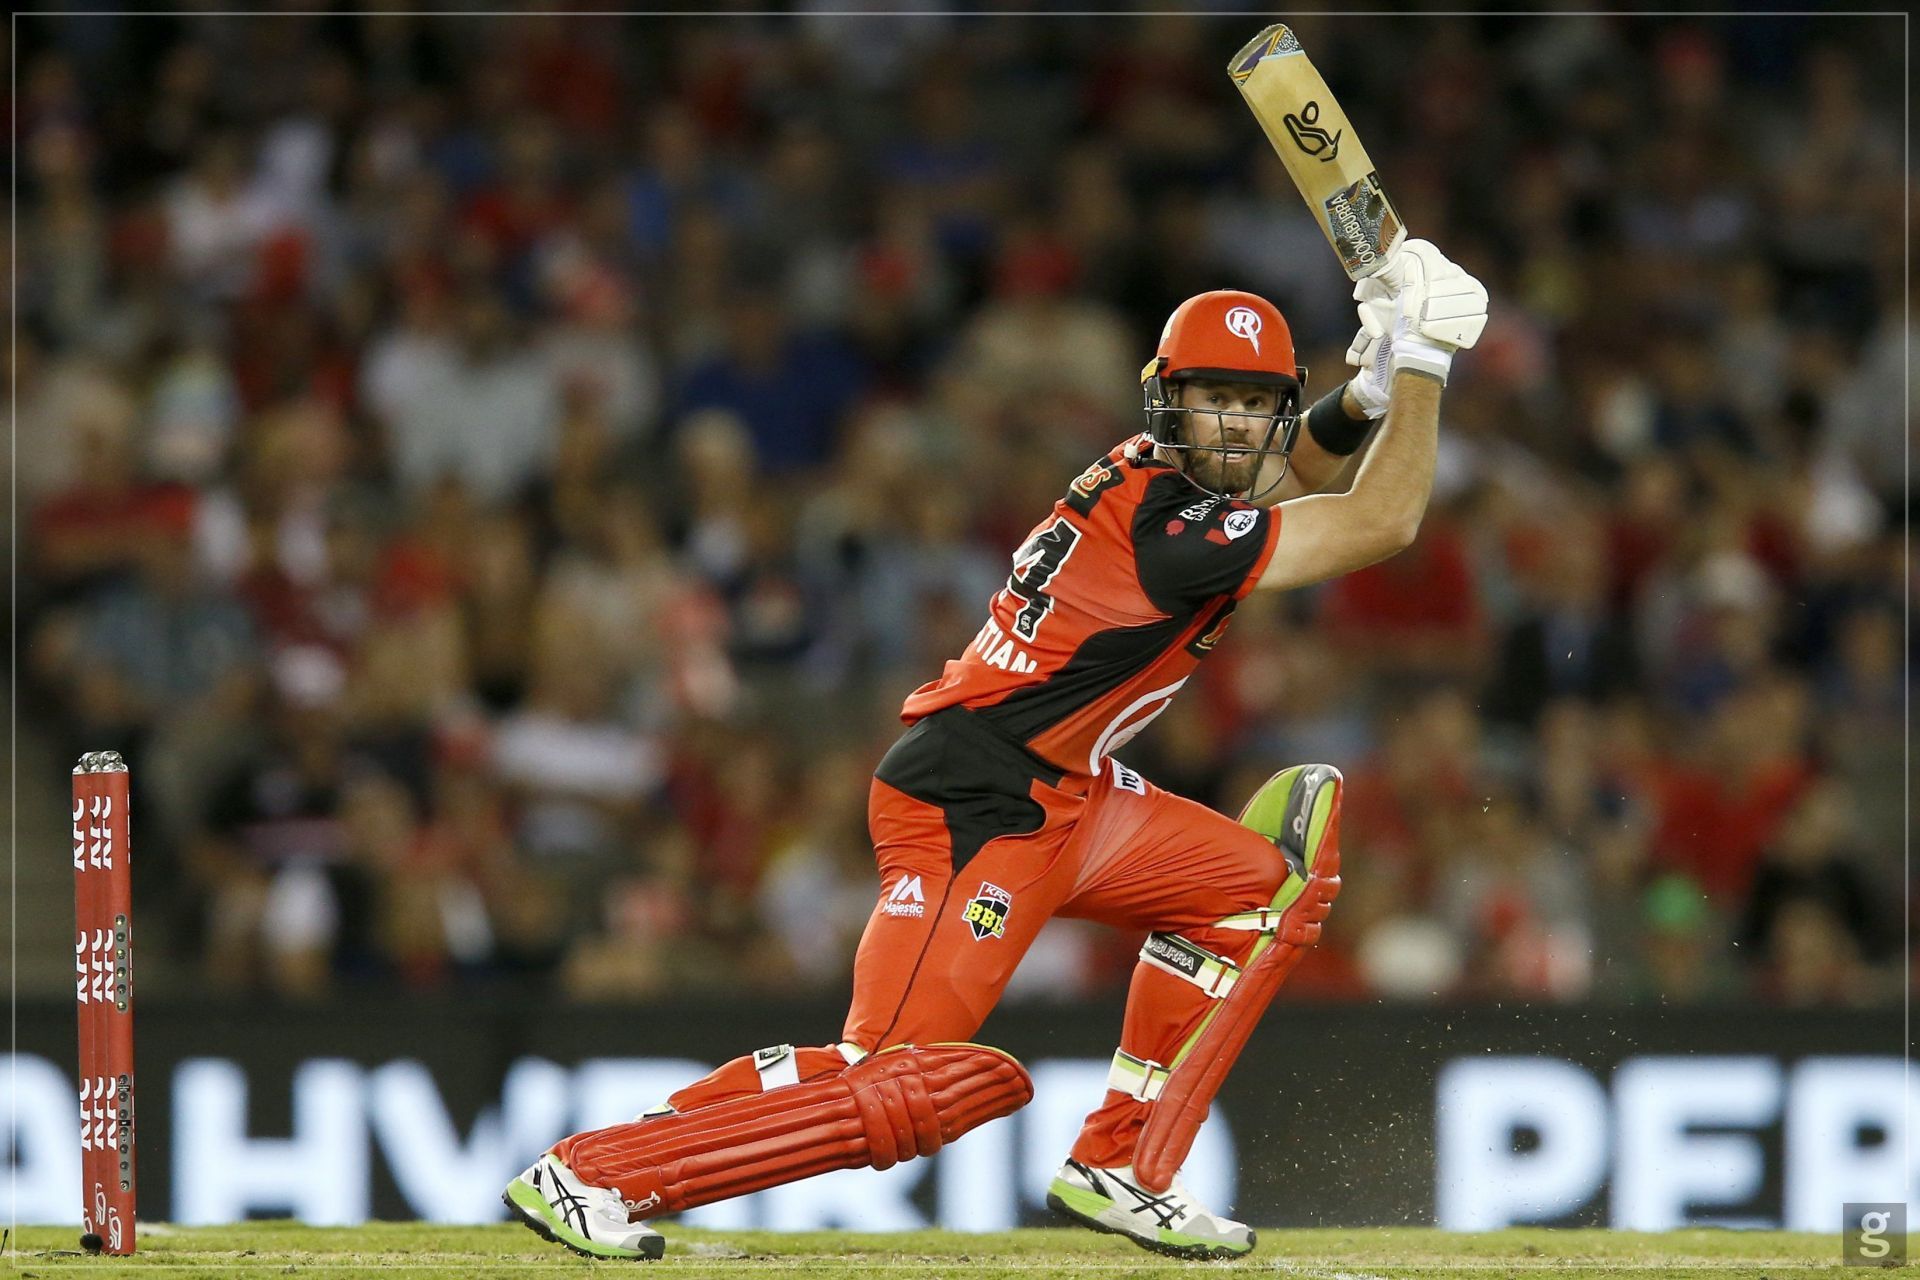 With 121 matches under his belt, Dan Christian is the most-capped player in BBL history